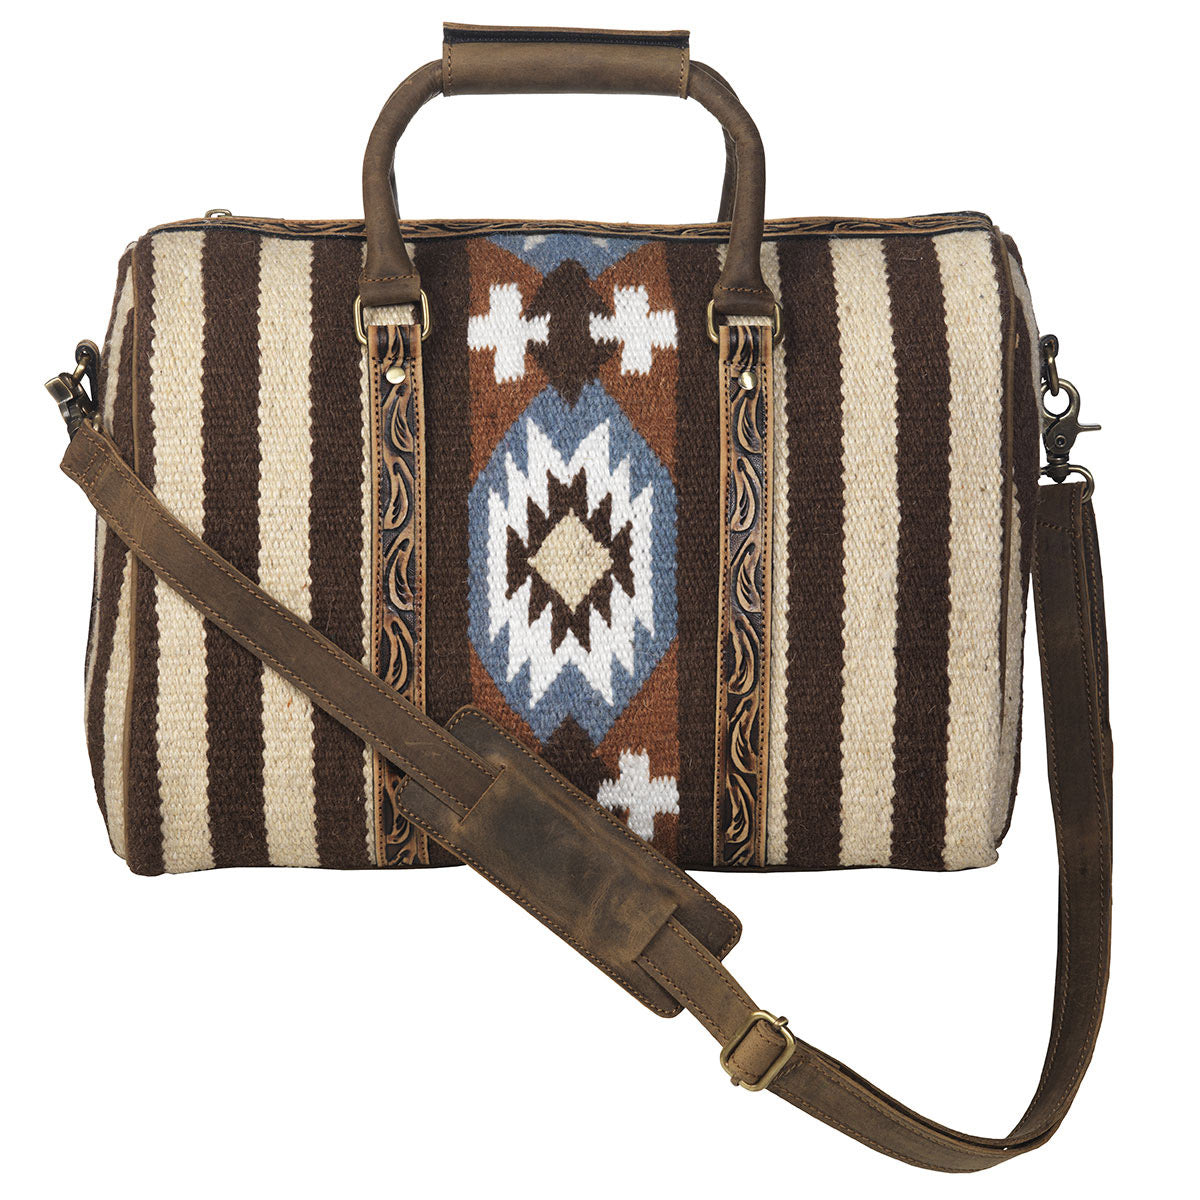 Southwestern Style Duffle Bag With Tooled Leather